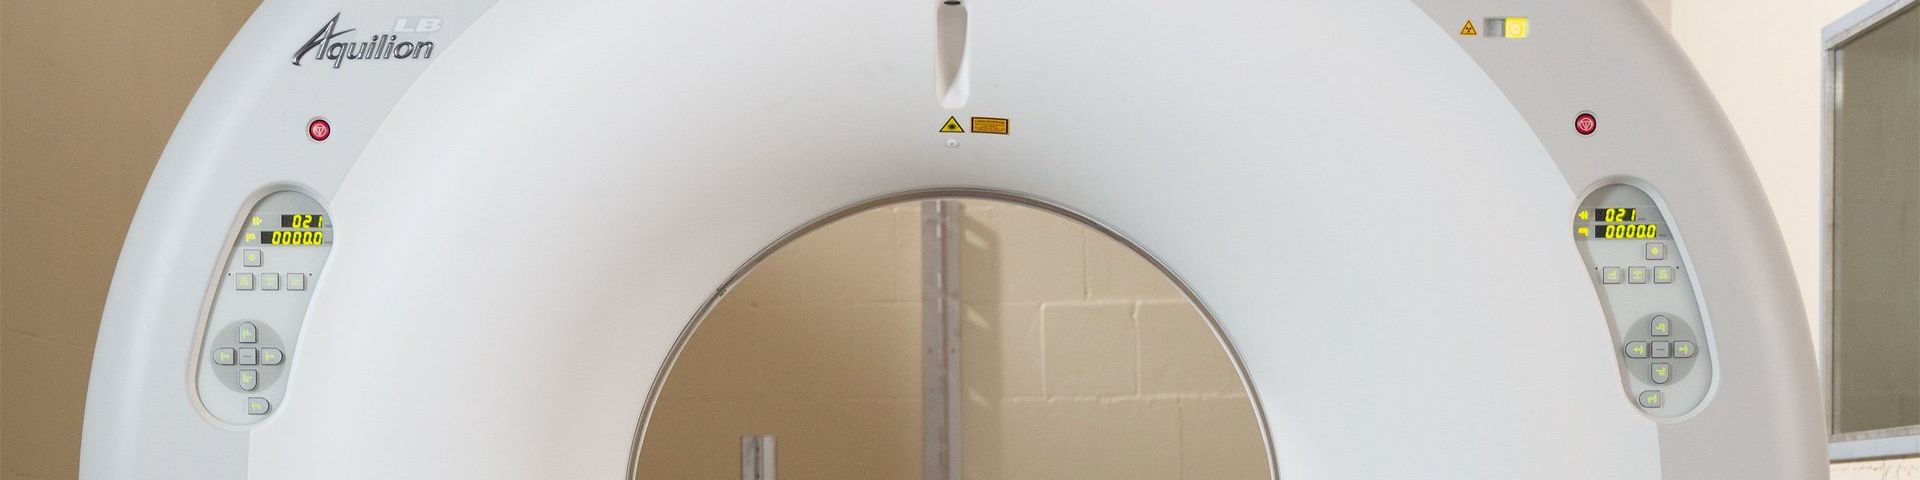 A white, half-doughnut shaped machine, which is a partial view of a Canon Medical Aquilion LB CT Scanner. It has operating buttons on either side of the central gantry.